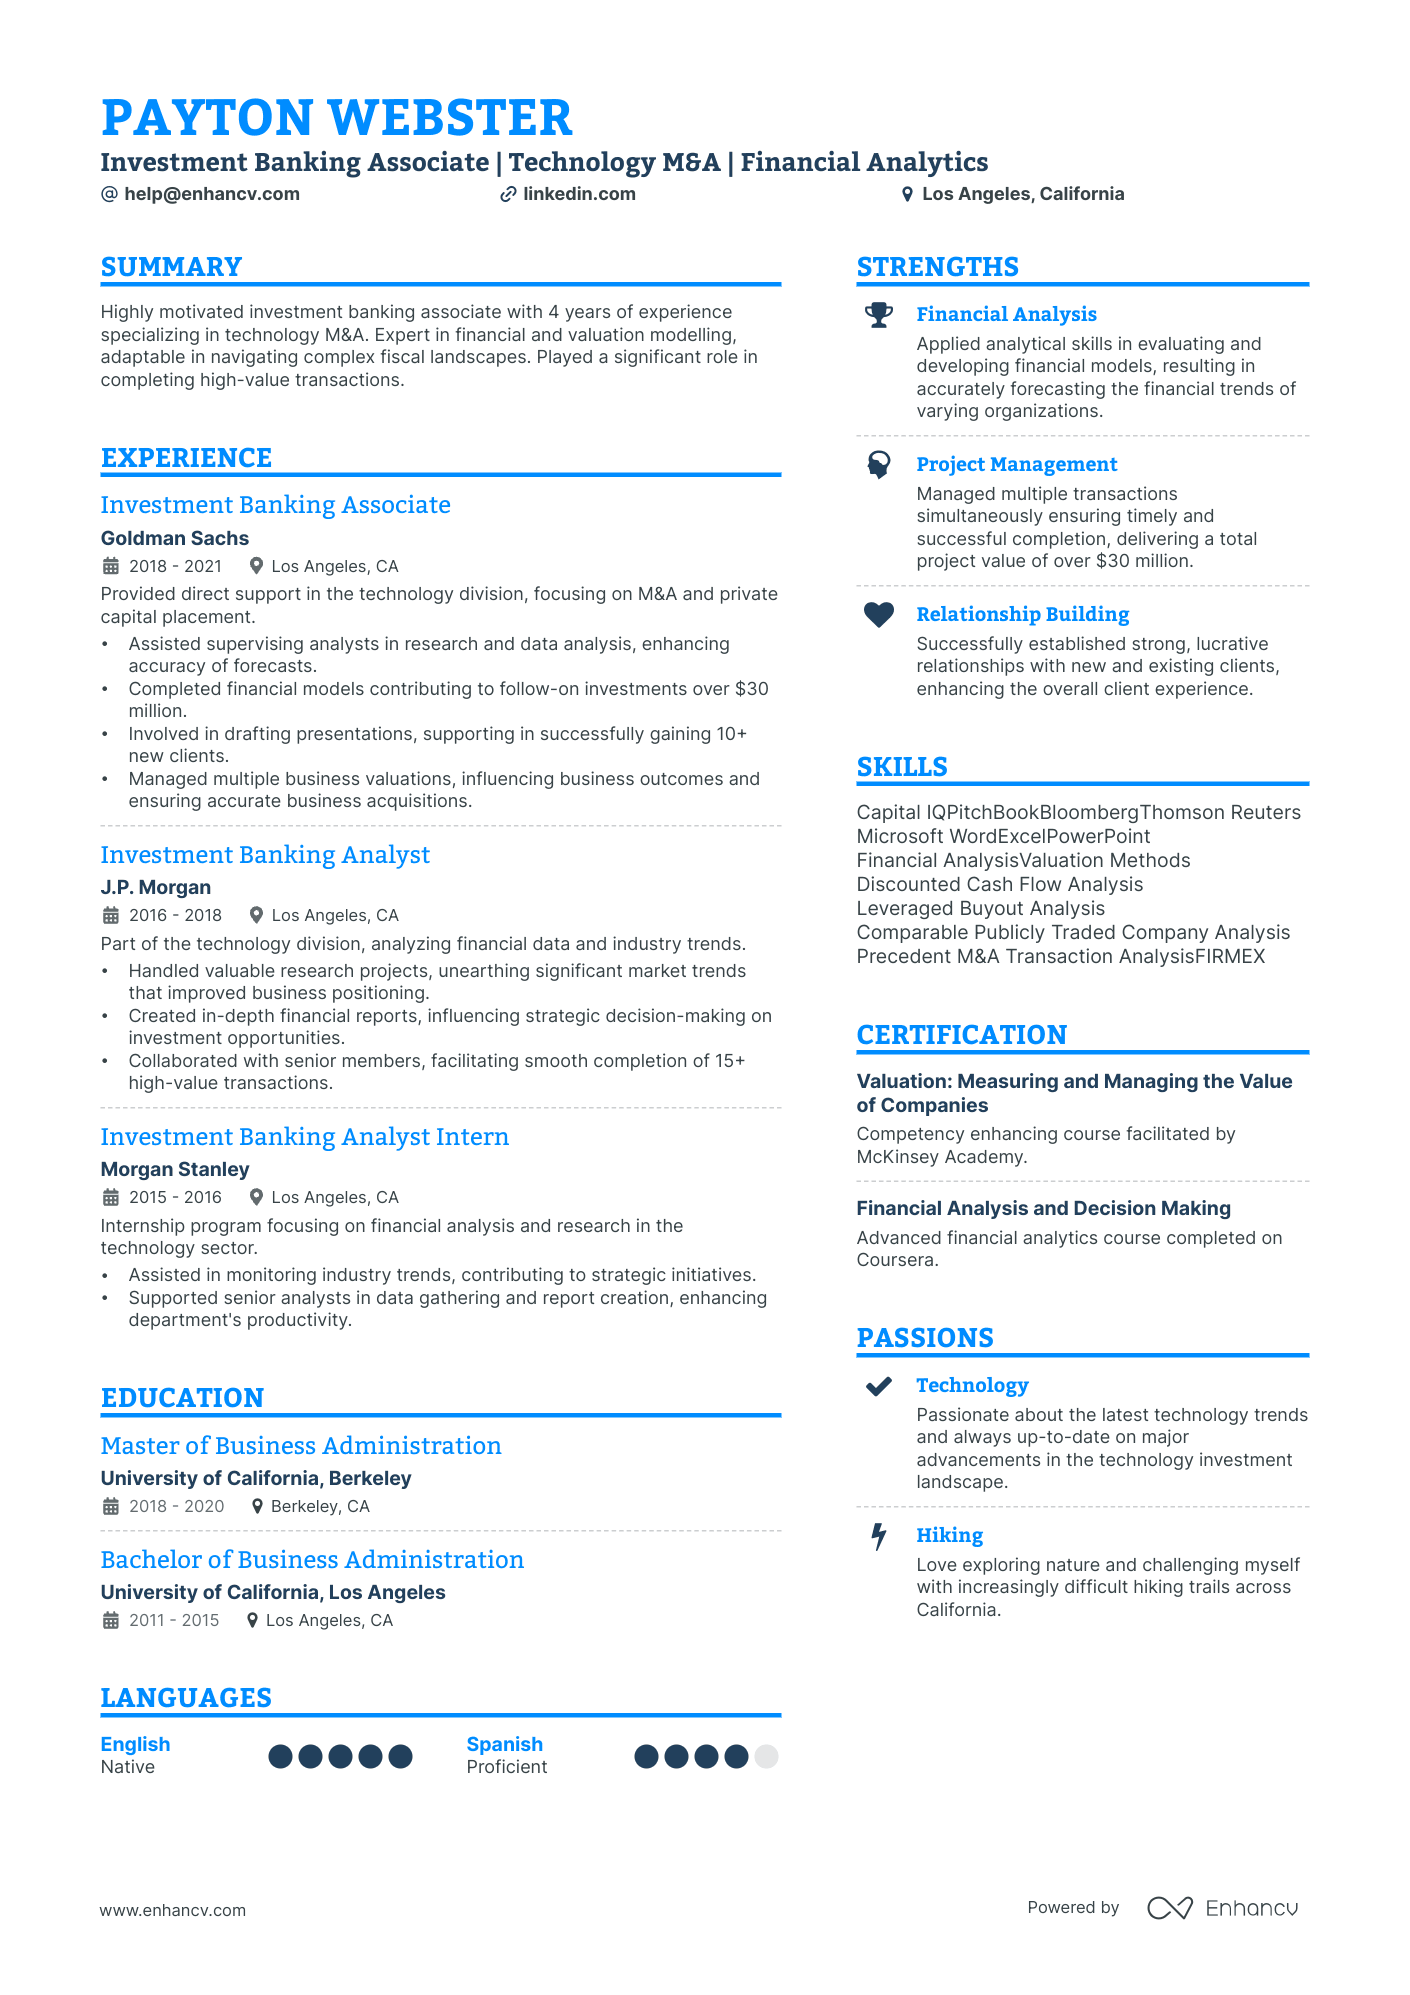 Investment Banking Associate resume example